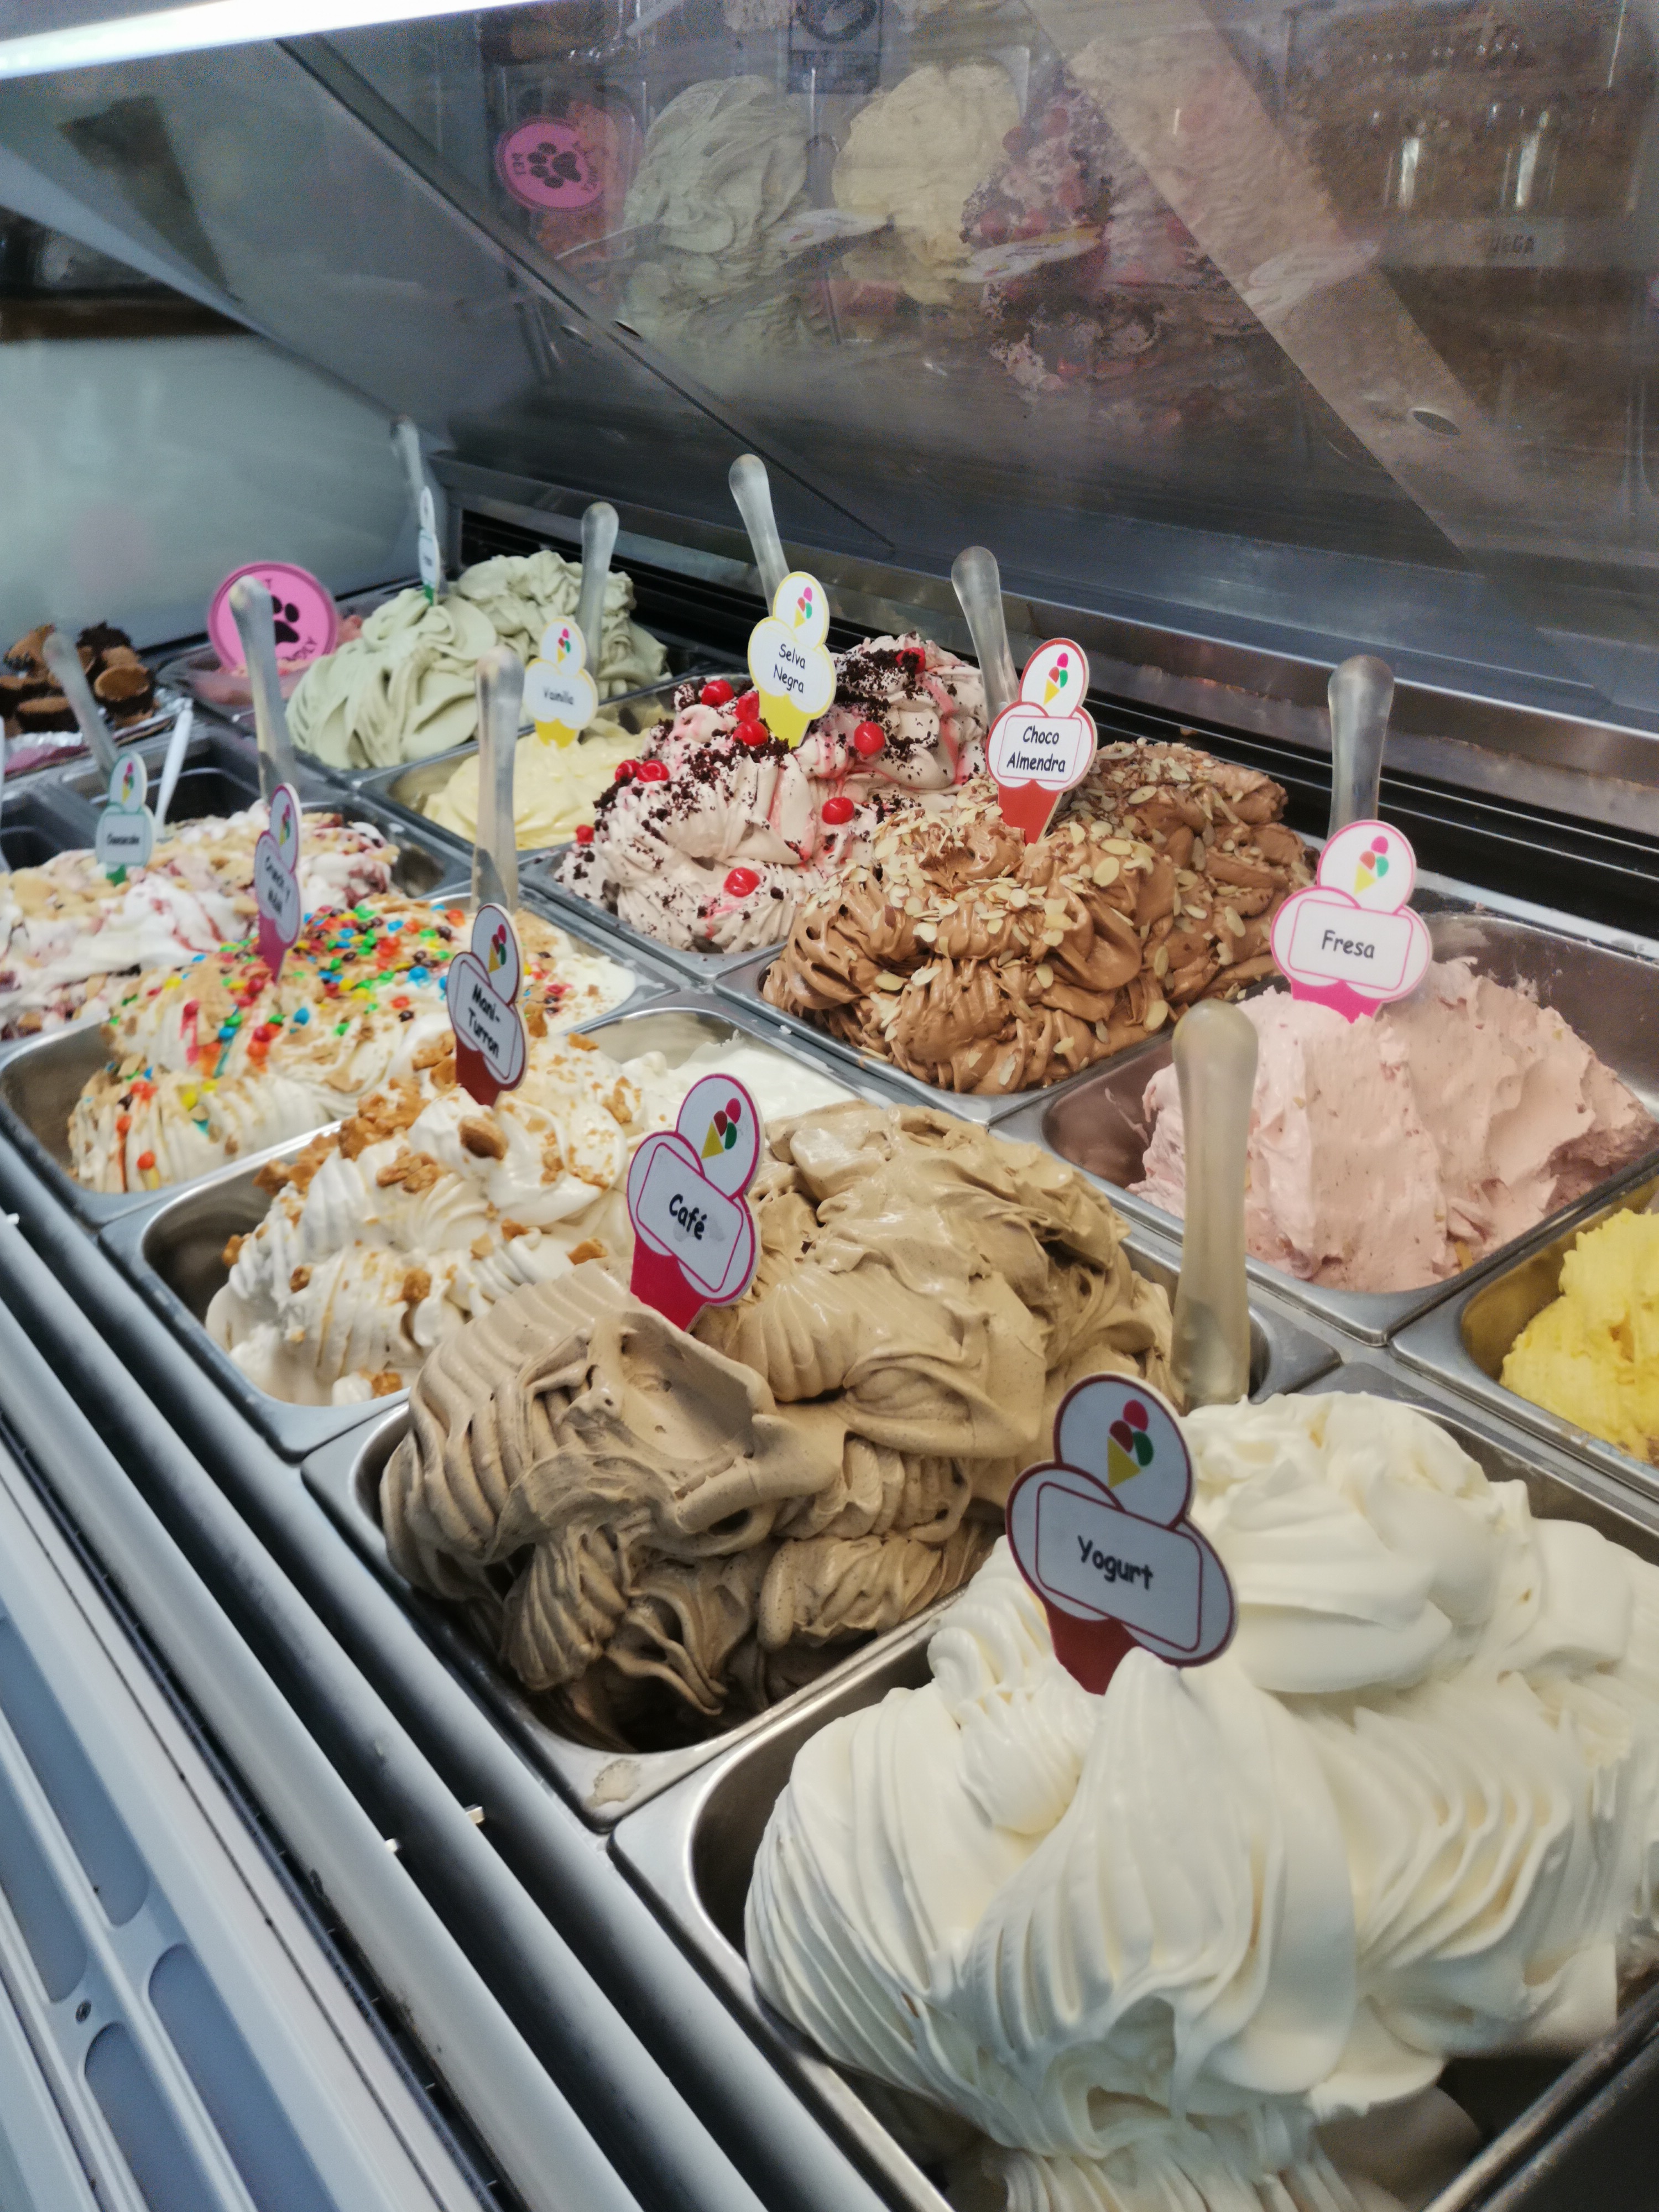 Thriving Gelato Café in David, Panama - PLS-19939 | Turnkey Business with Growth Potential